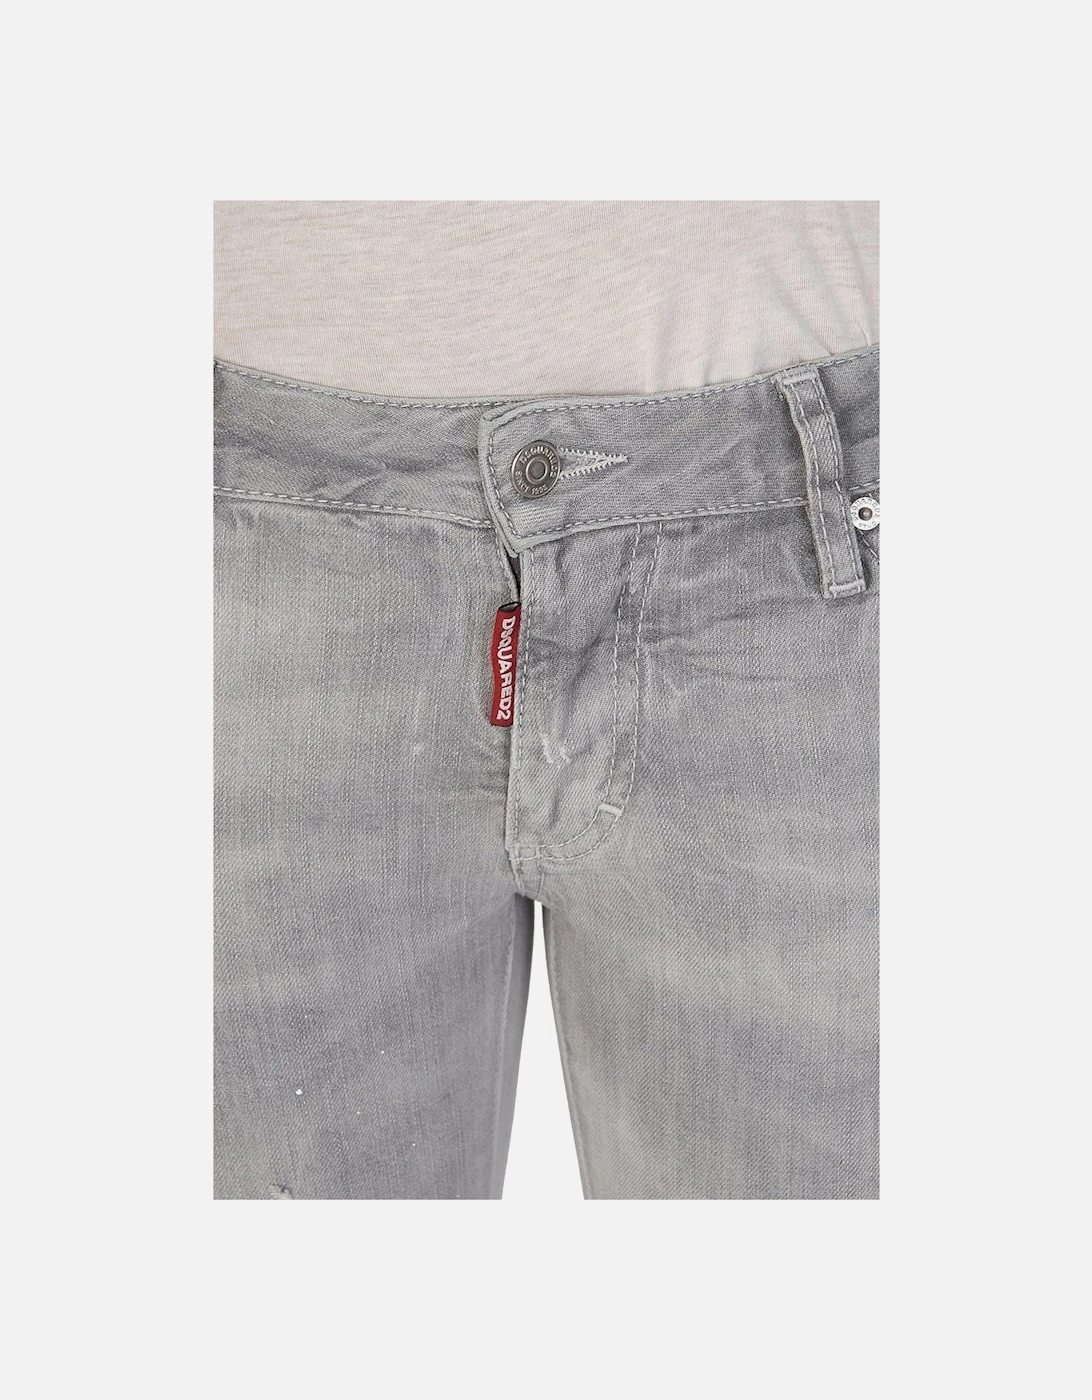 Womens Mid Rise Jeans Grey